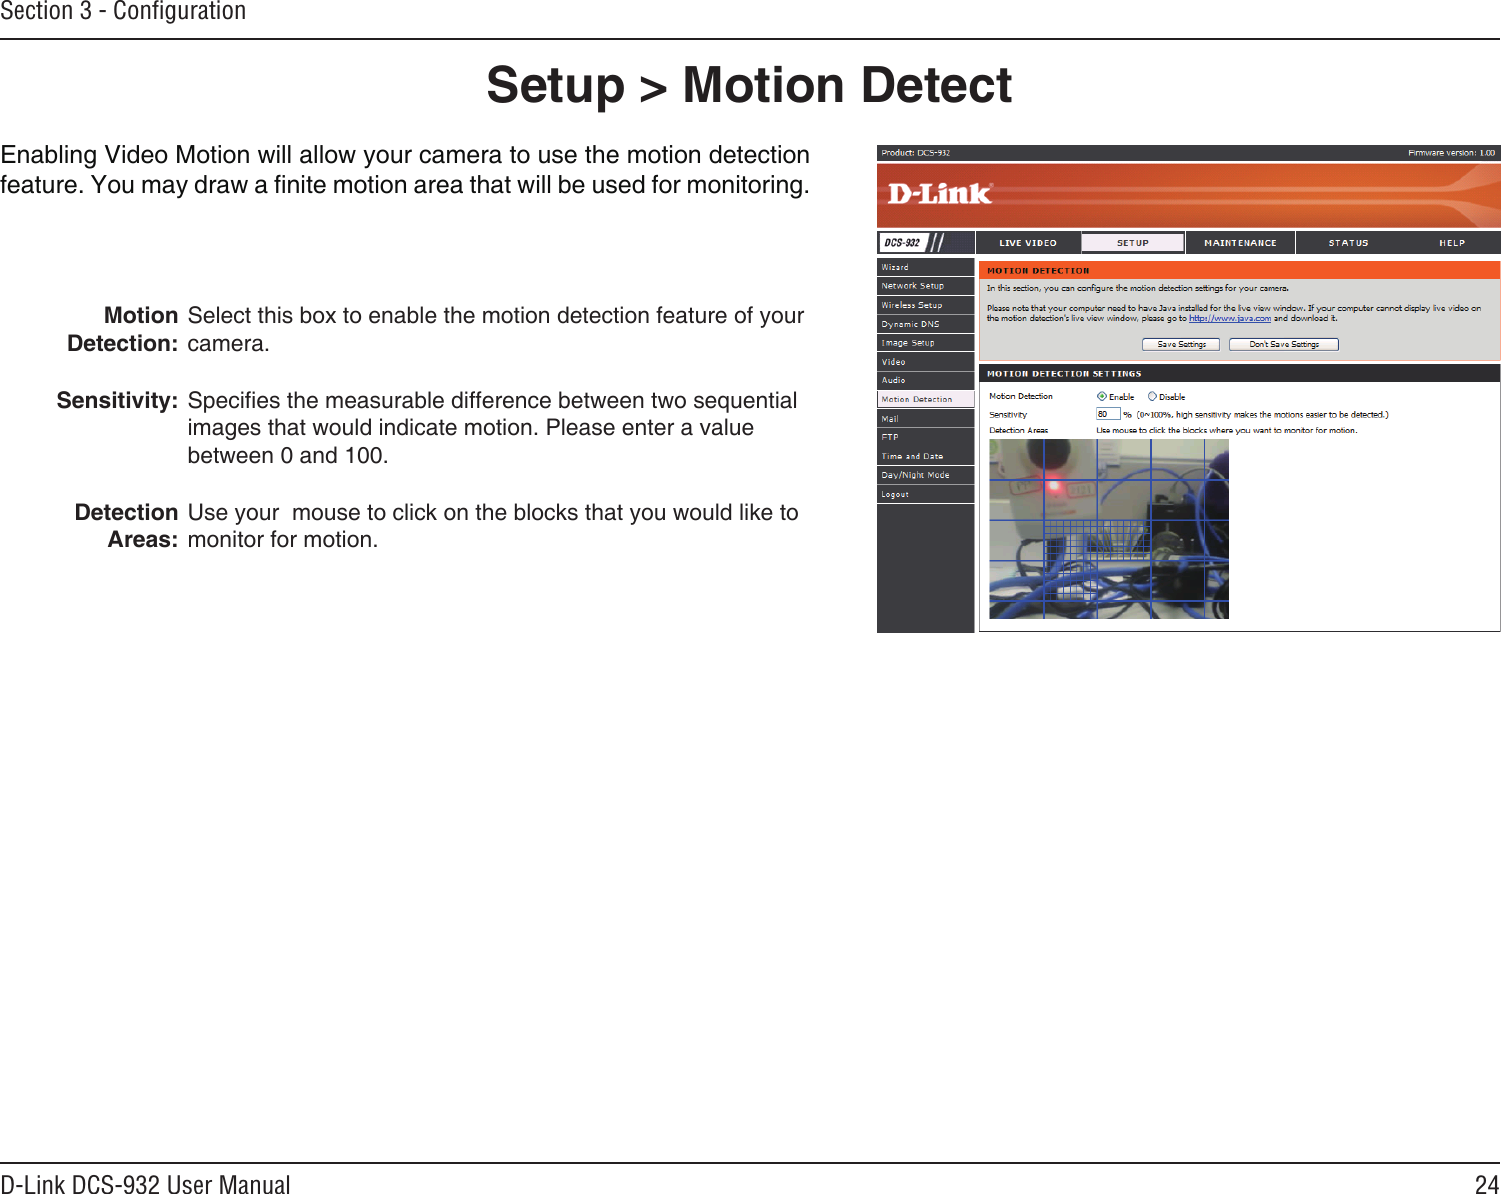 24D-Link DCS-932 User ManualSection 3 - ConﬁgurationSetup &gt; Motion DetectEnabling Video Motion will allow your camera to use the motion detection feature. You may draw a nite motion area that will be used for monitoring.Motion Detection:Sensitivity:  Detection Areas:Select this box to enable the motion detection feature of your camera.Species the measurable difference between two sequential images that would indicate motion. Please enter a value between 0 and 100.Use your  mouse to click on the blocks that you would like to monitor for motion. 